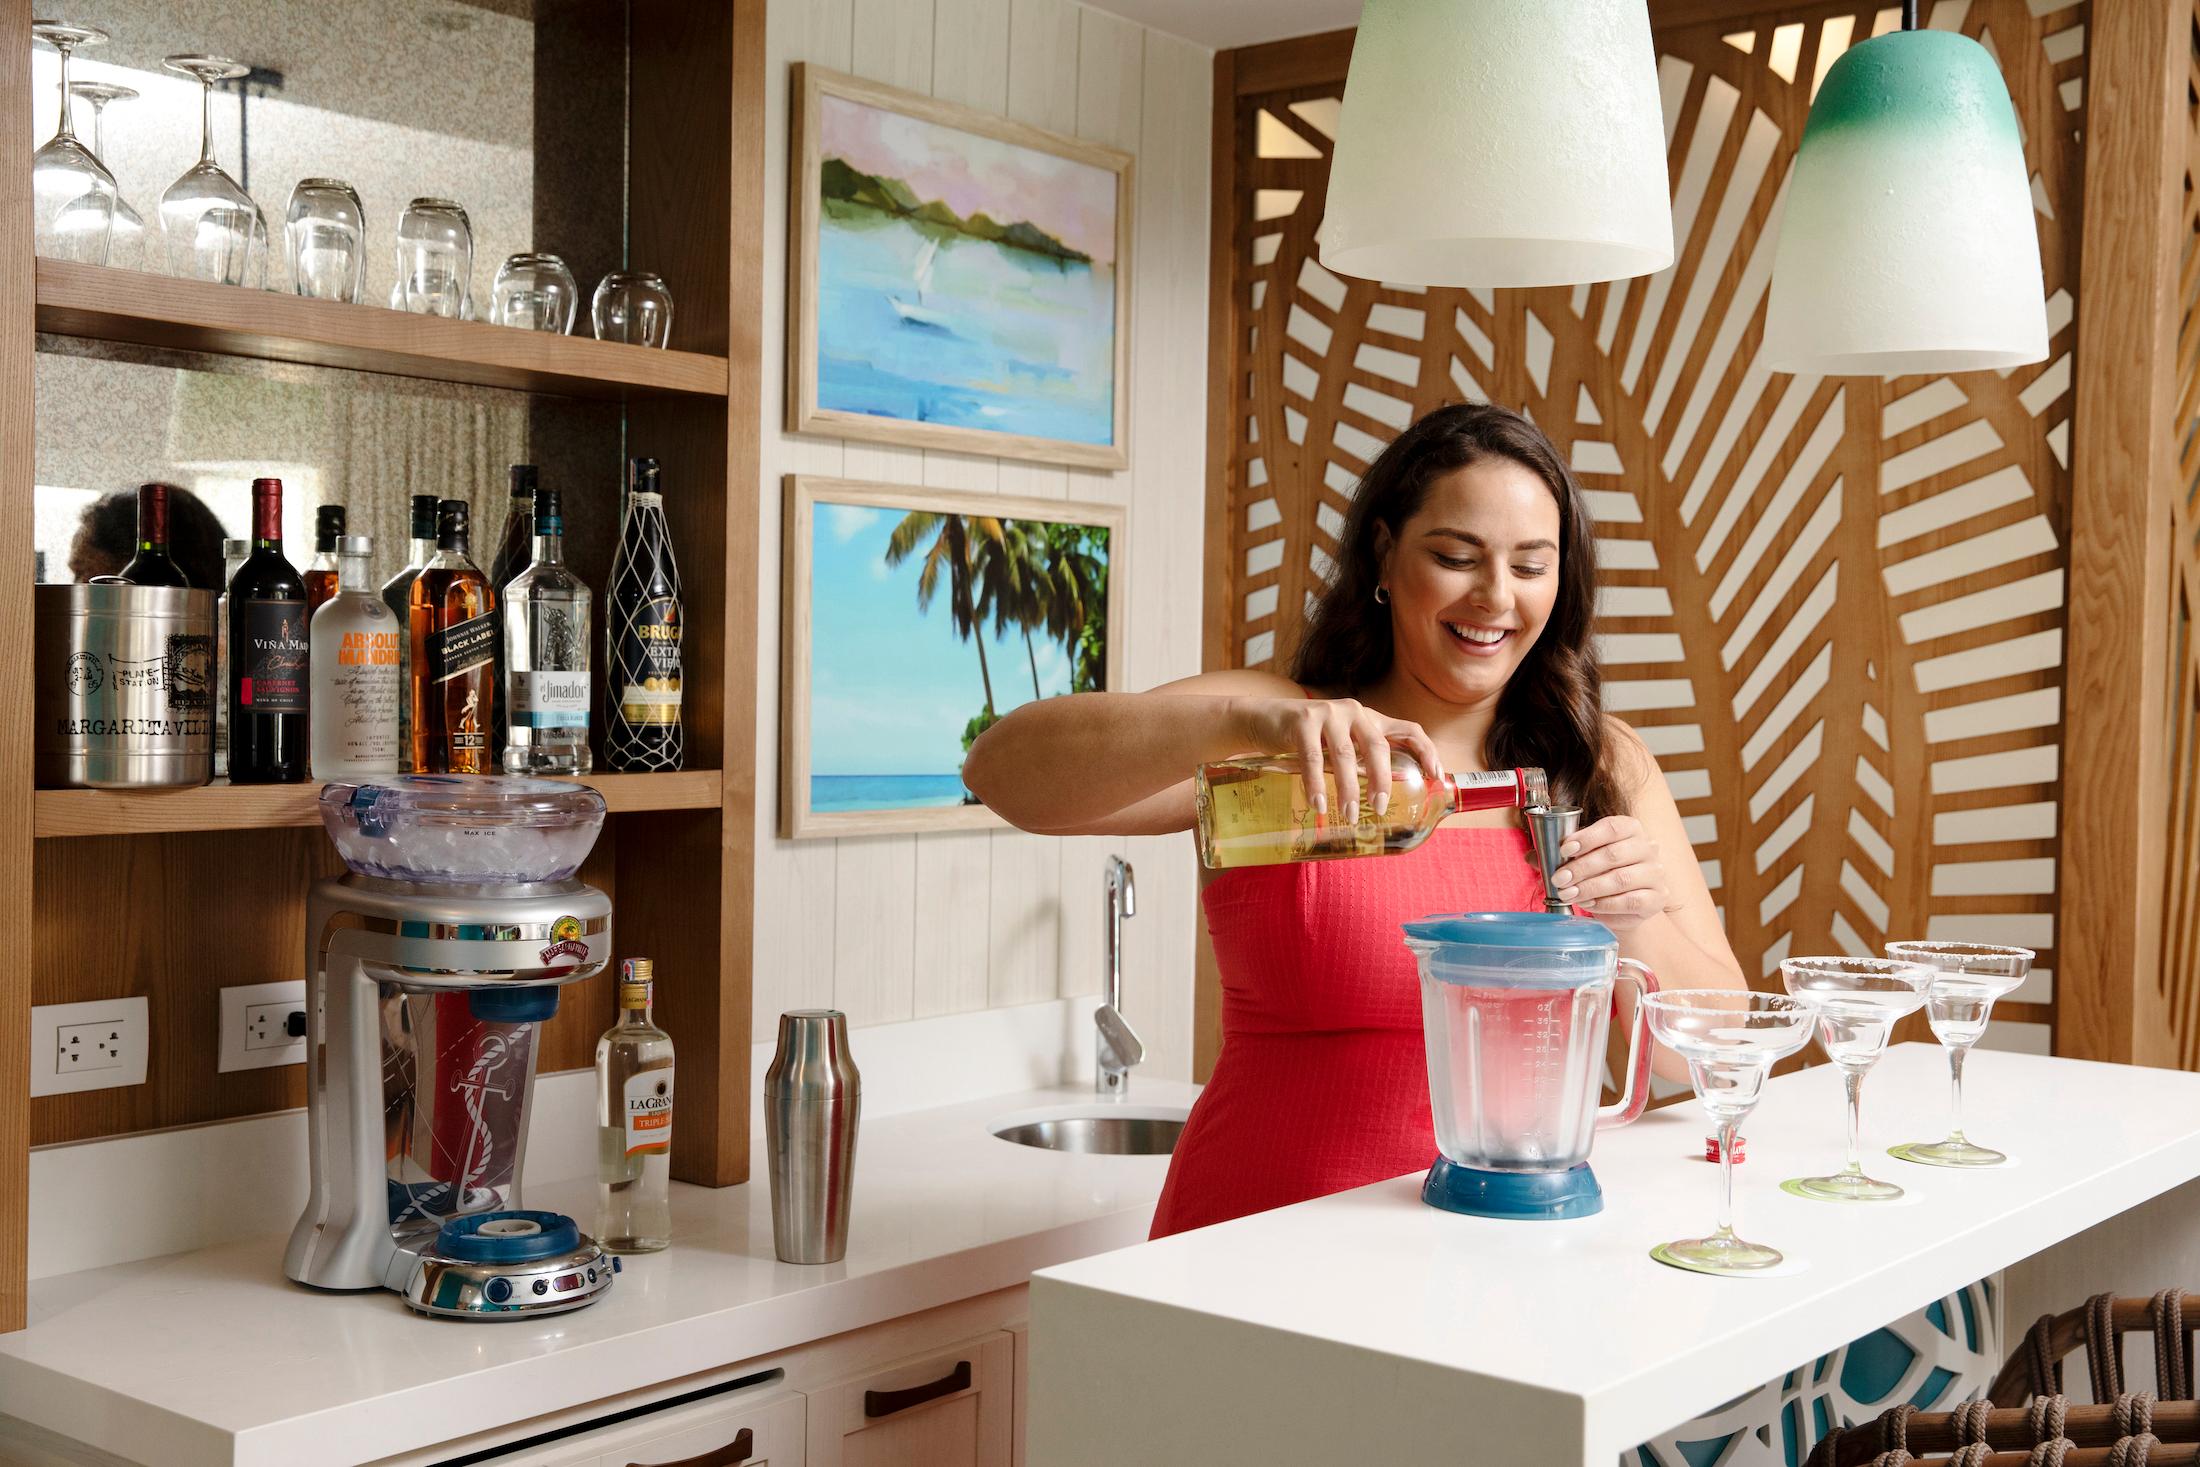 A woman mixes a cocktail in a blender